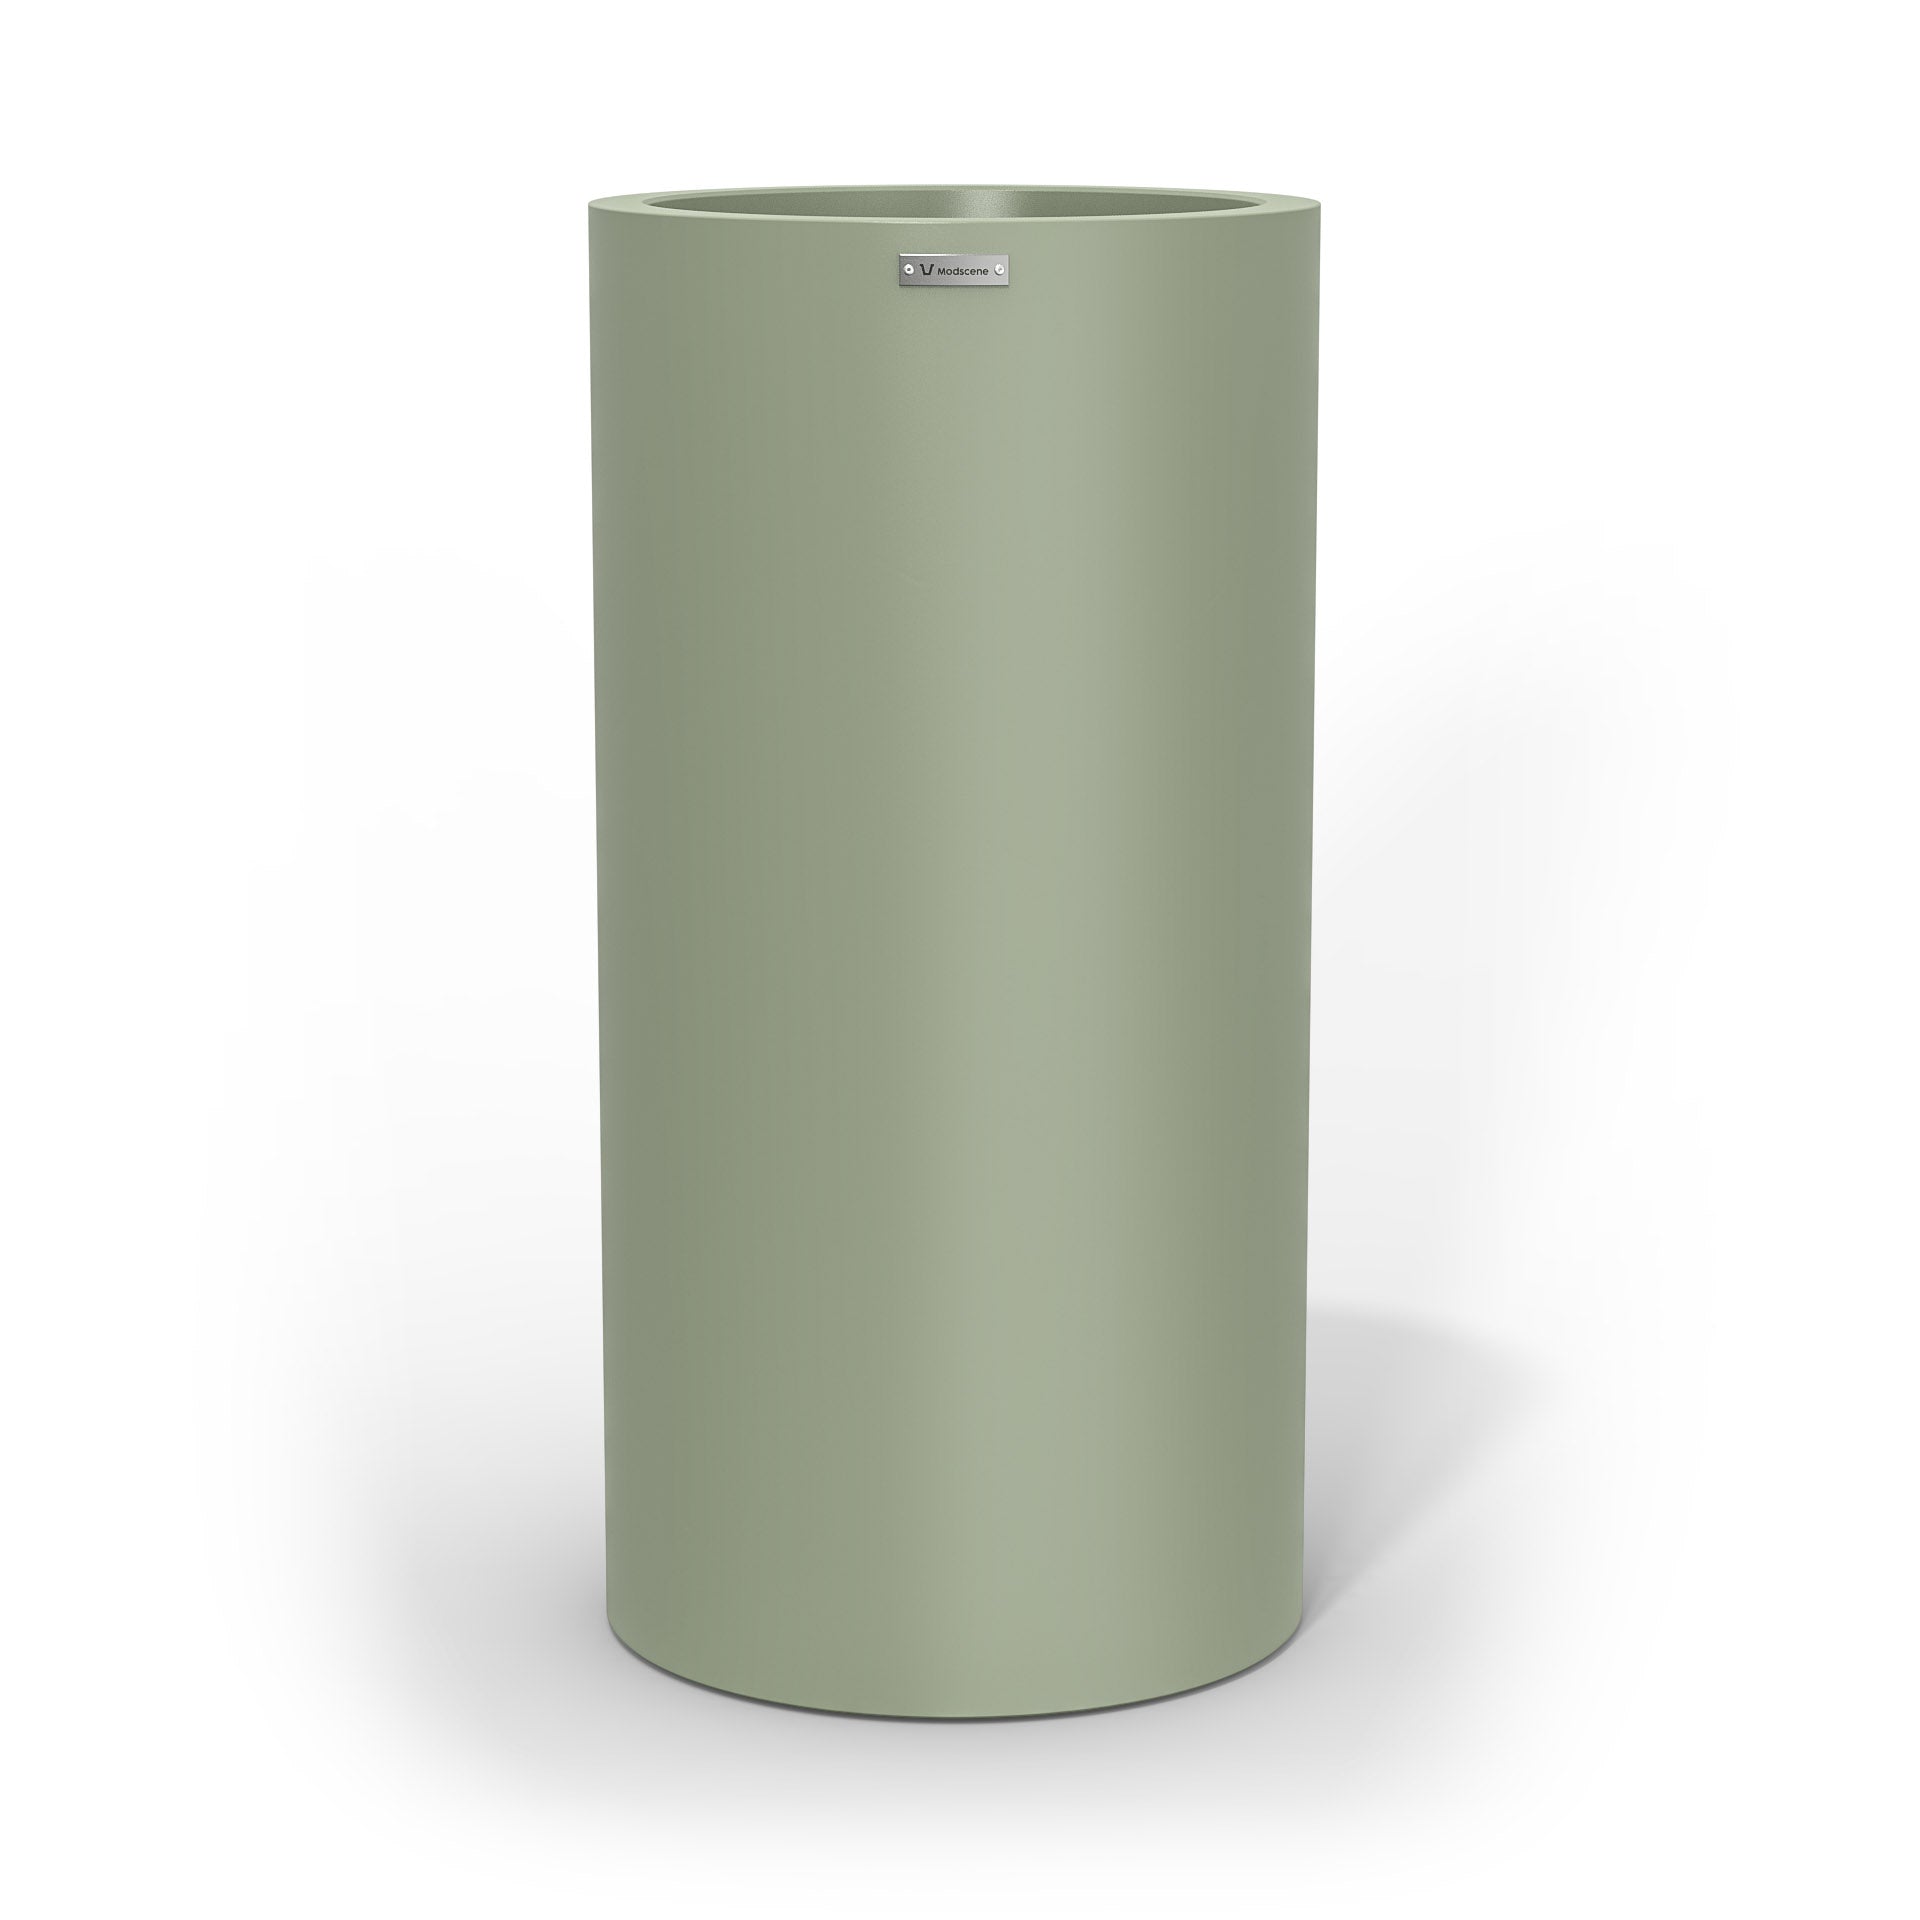 A tall cylinder planter pot in a pastel green colour made by Modscene NZ.